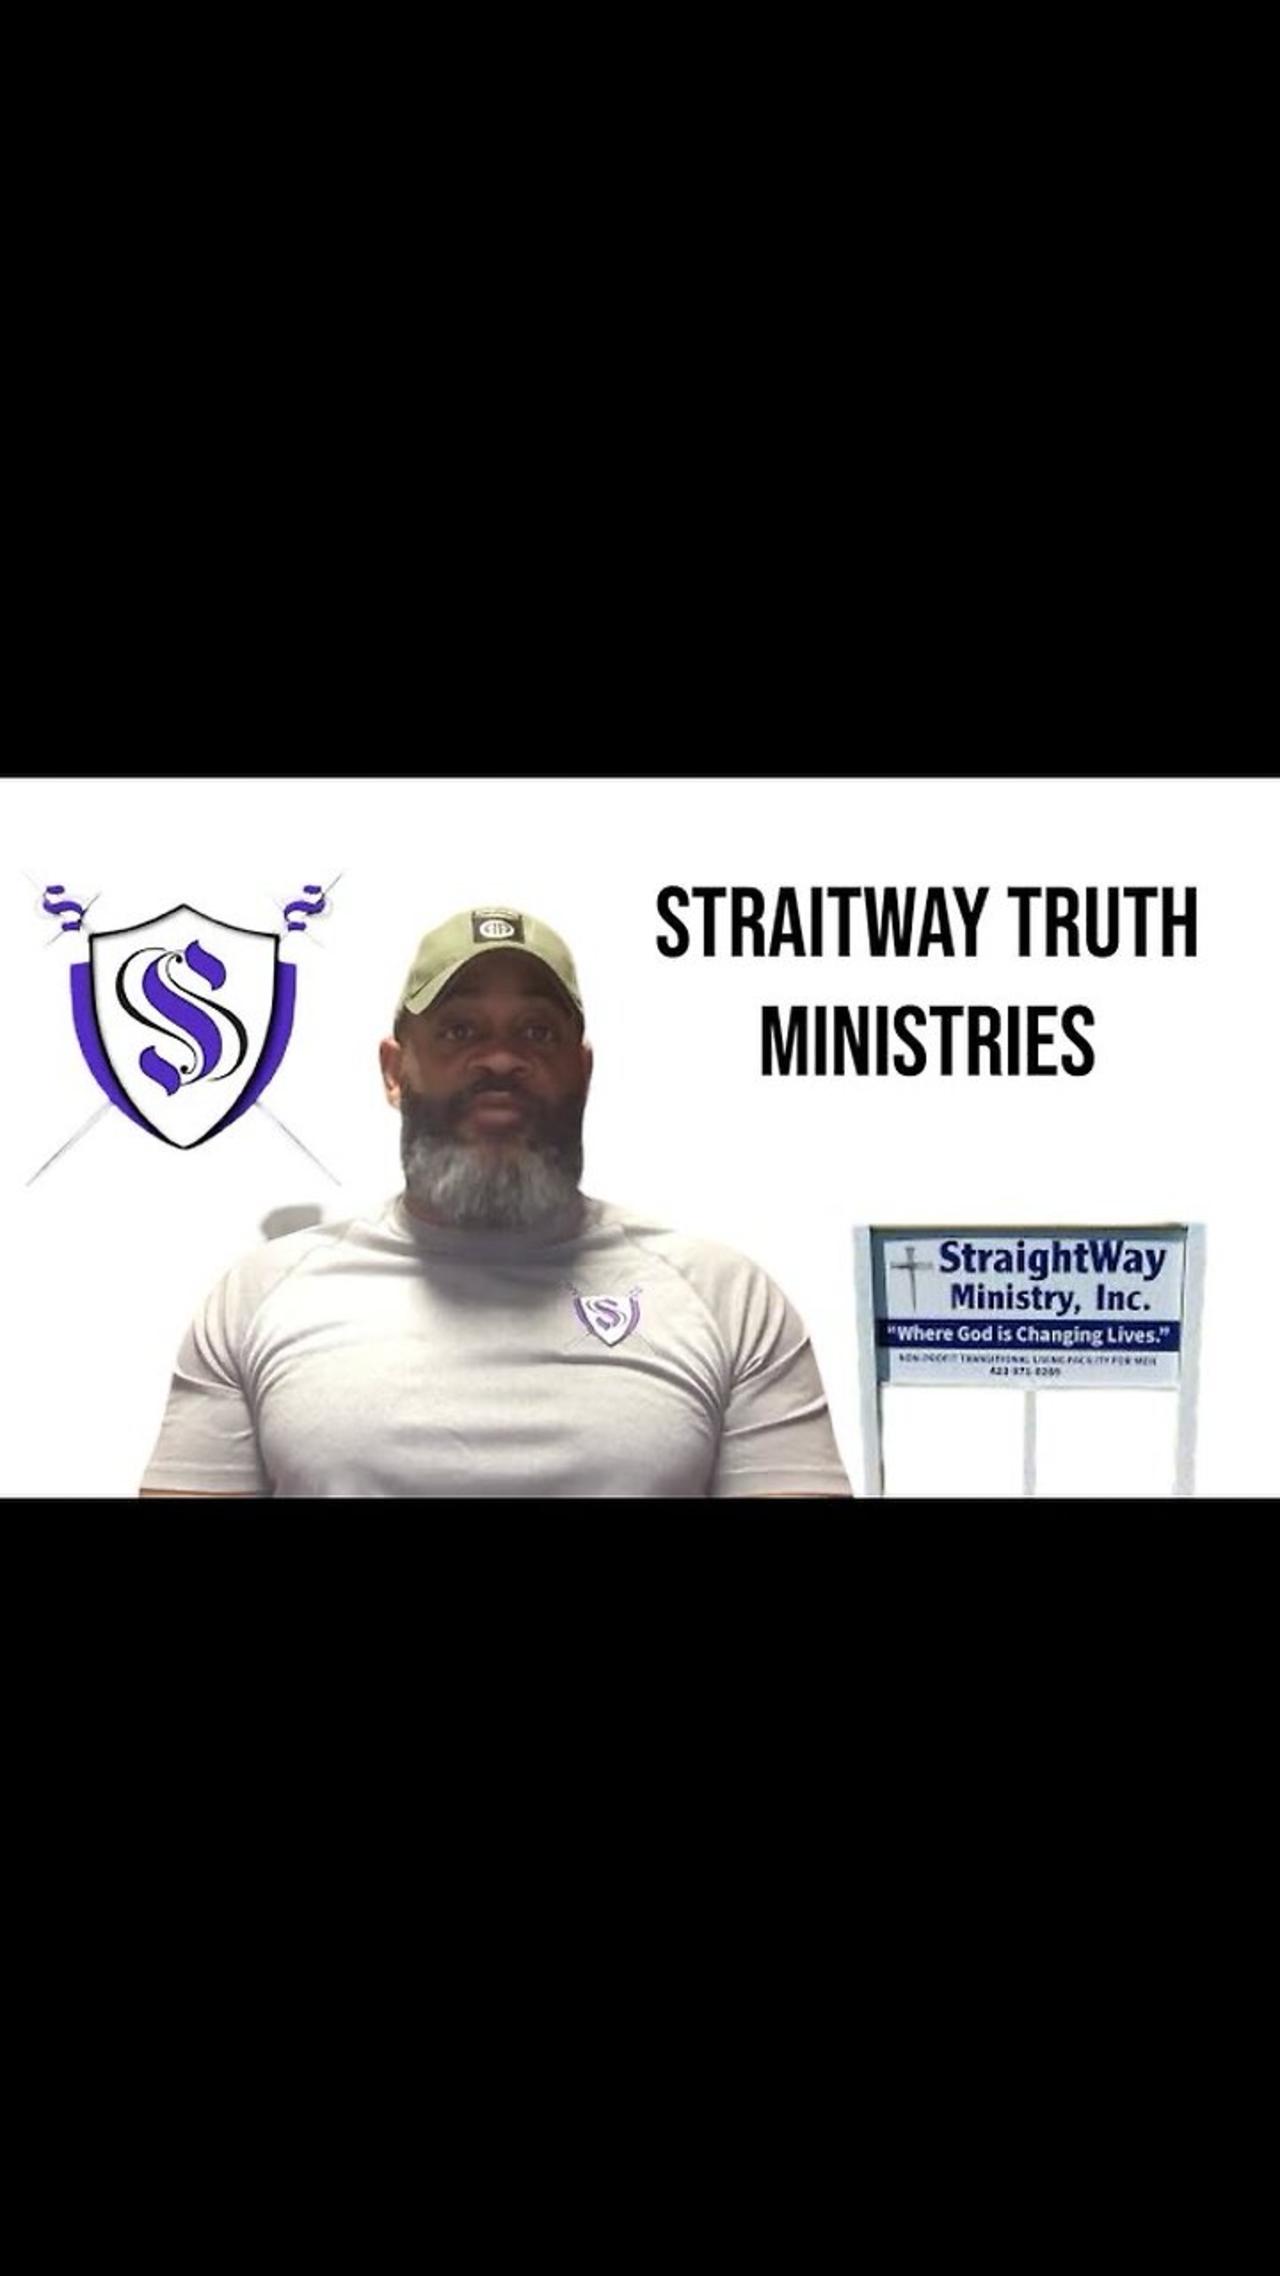 Cult #1 - Straitway Truth Ministry - Religious Group Made Popular Thanks To High Profile Menbers